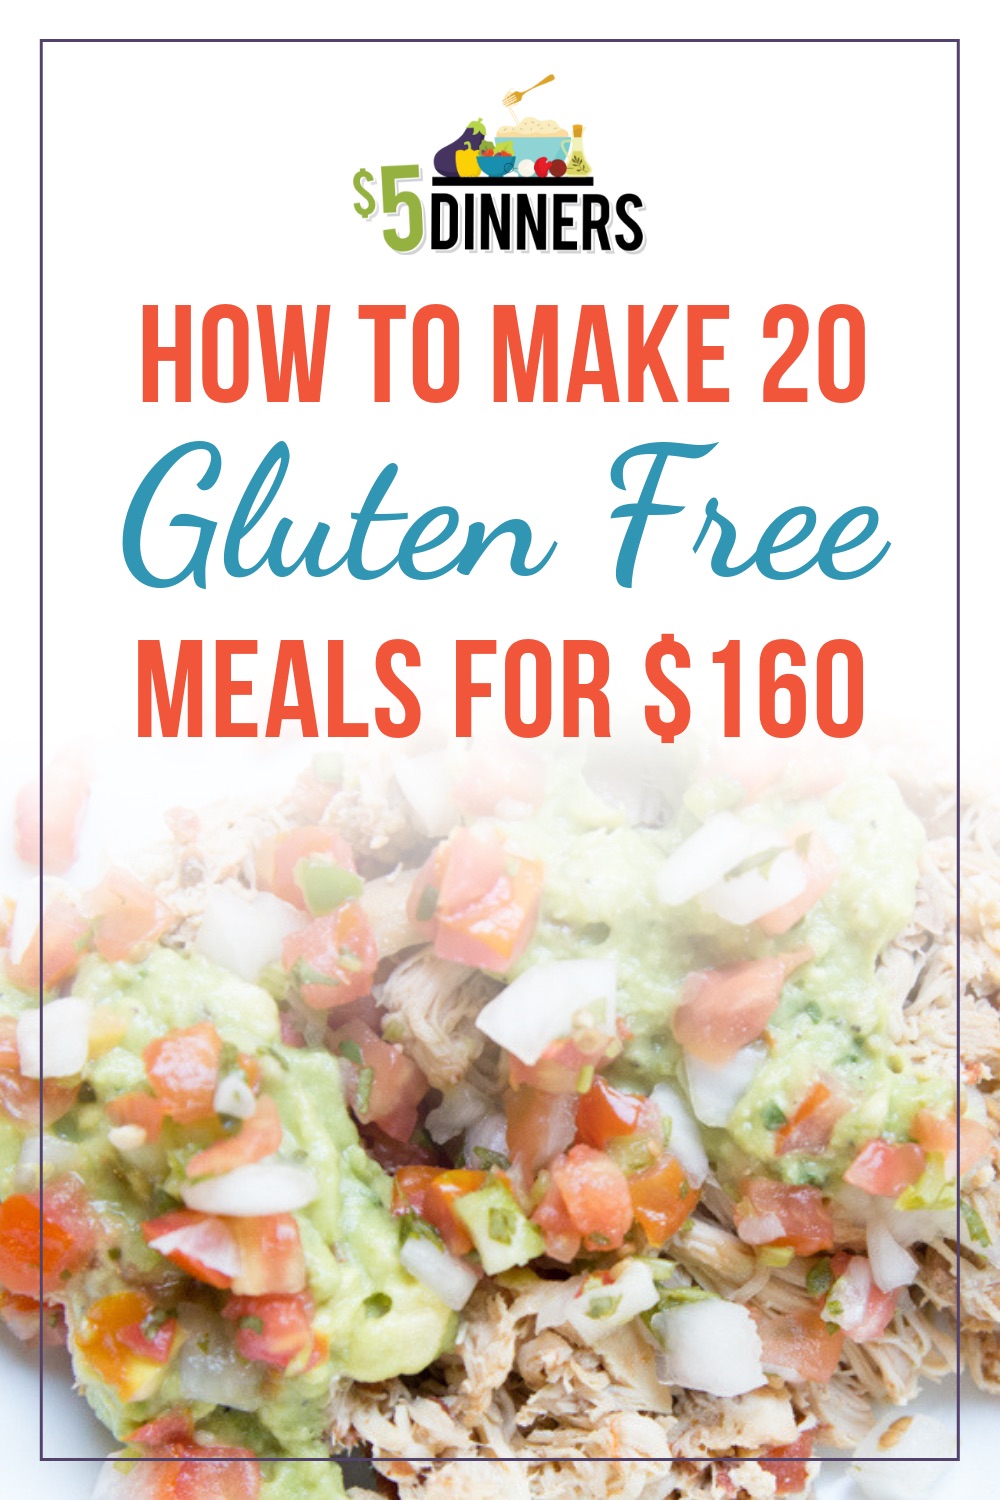 Gluten Free Freezer Cooking Plan – 20 Meals From Costco for $160